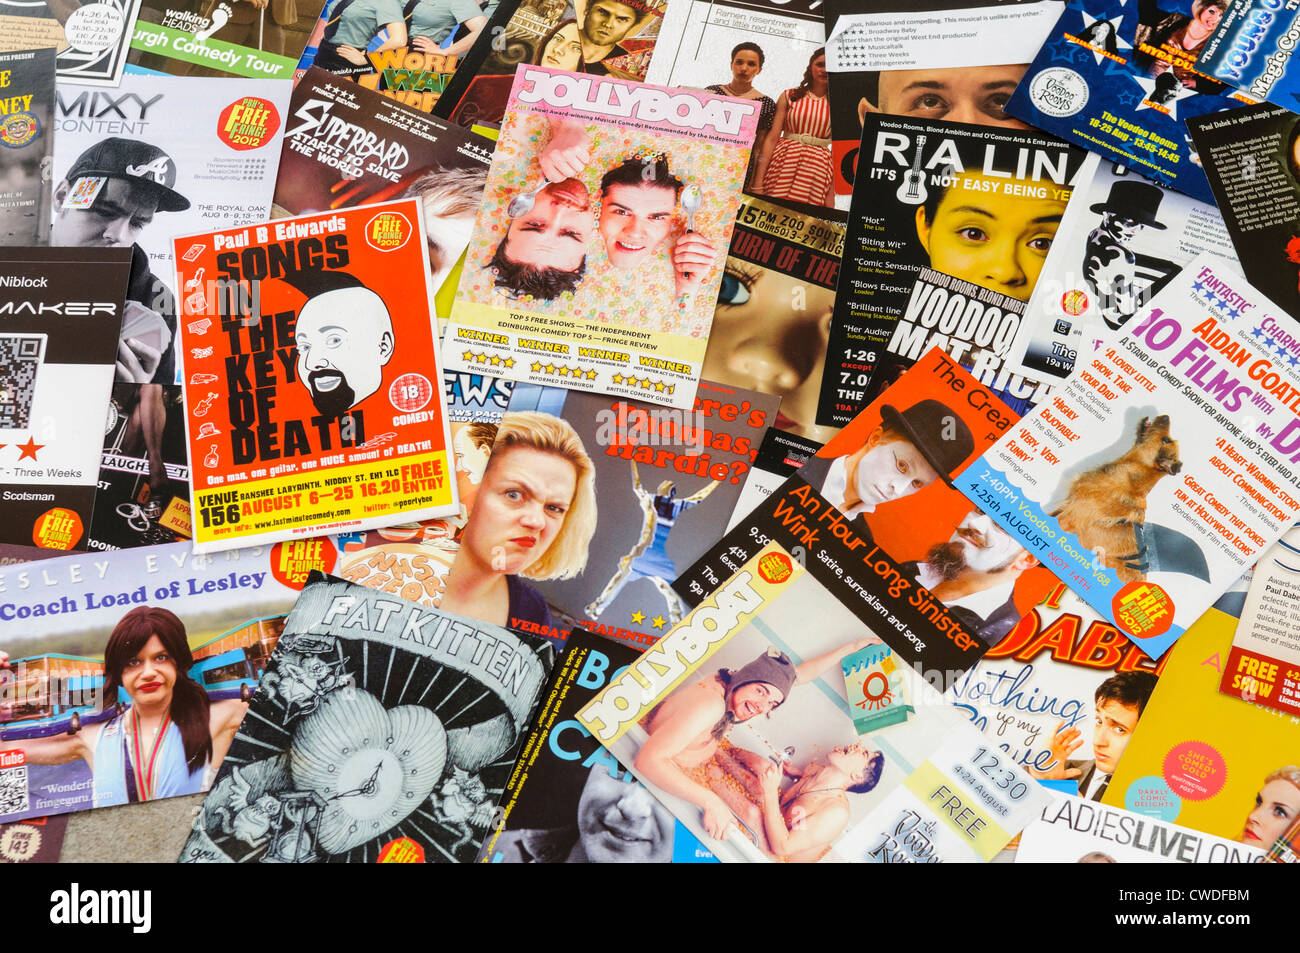 Lots of leaflets for shows at the Edinburgh Fringe Festival including comedy, cabaret, singing and dance Stock Photo